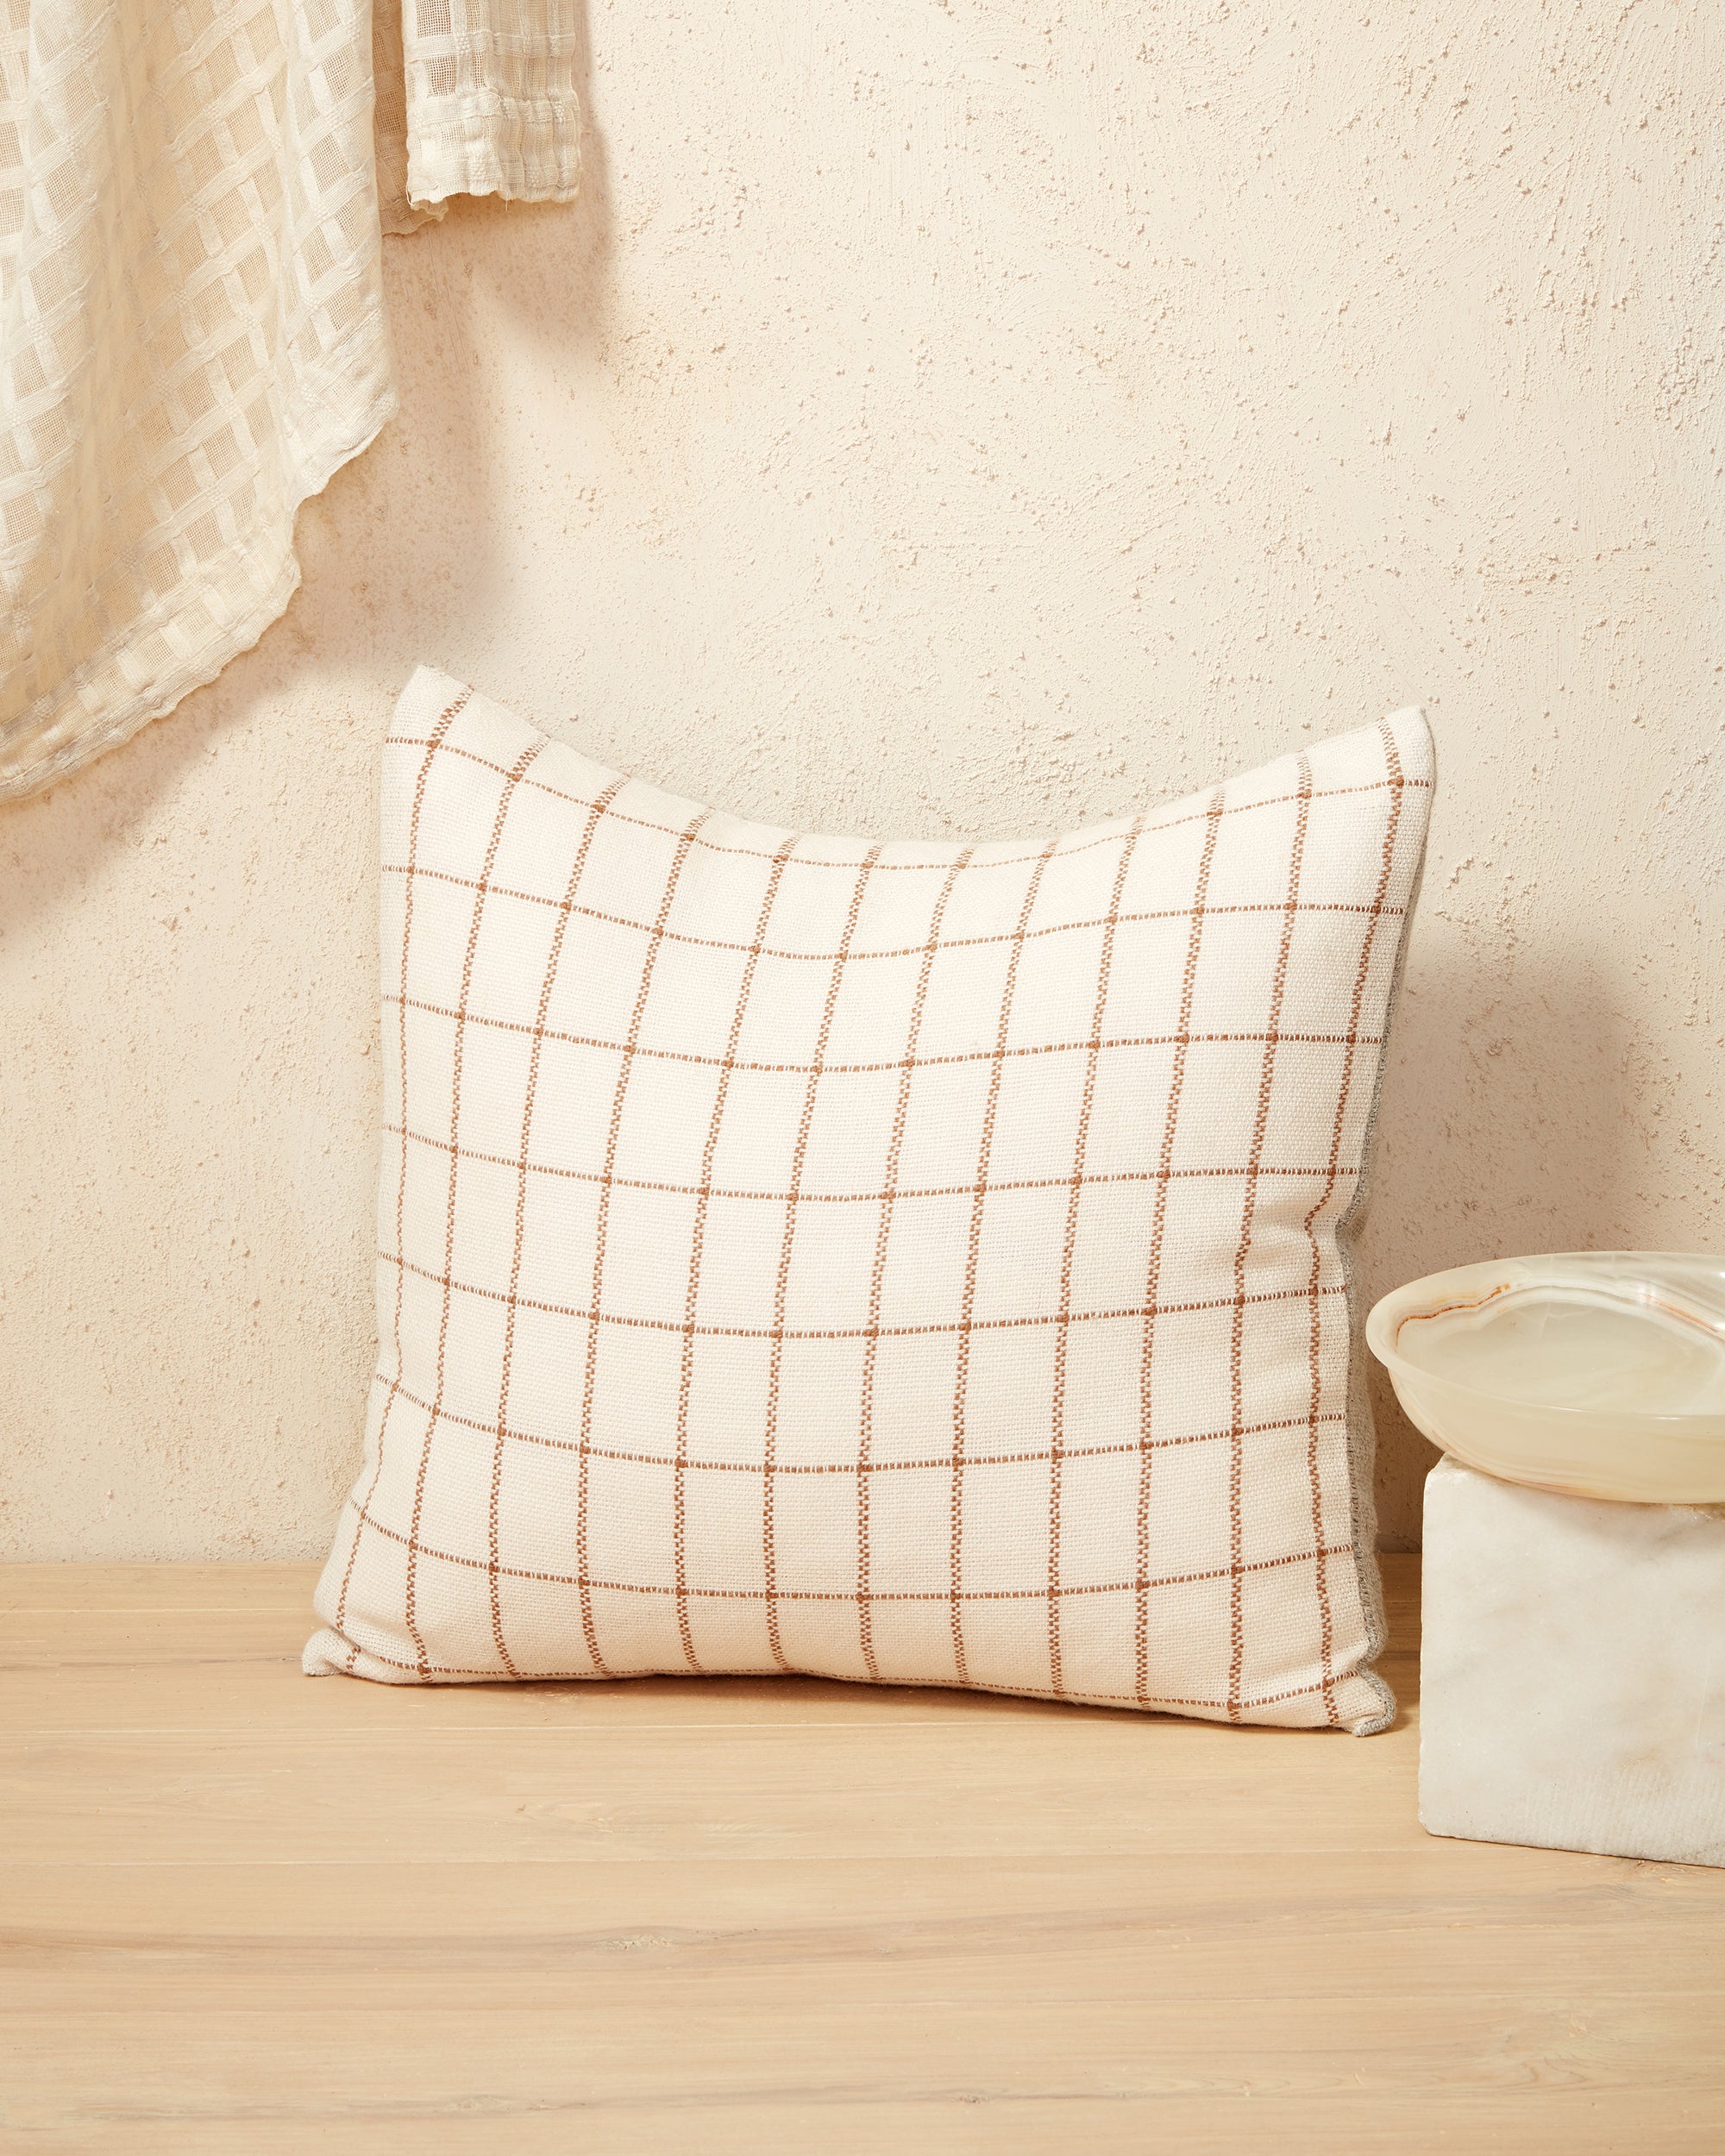 https://cdn.shopify.com/s/files/1/0918/1474/products/Pillow_Bolivia_A_styled_2000x.jpg?v=1536353847